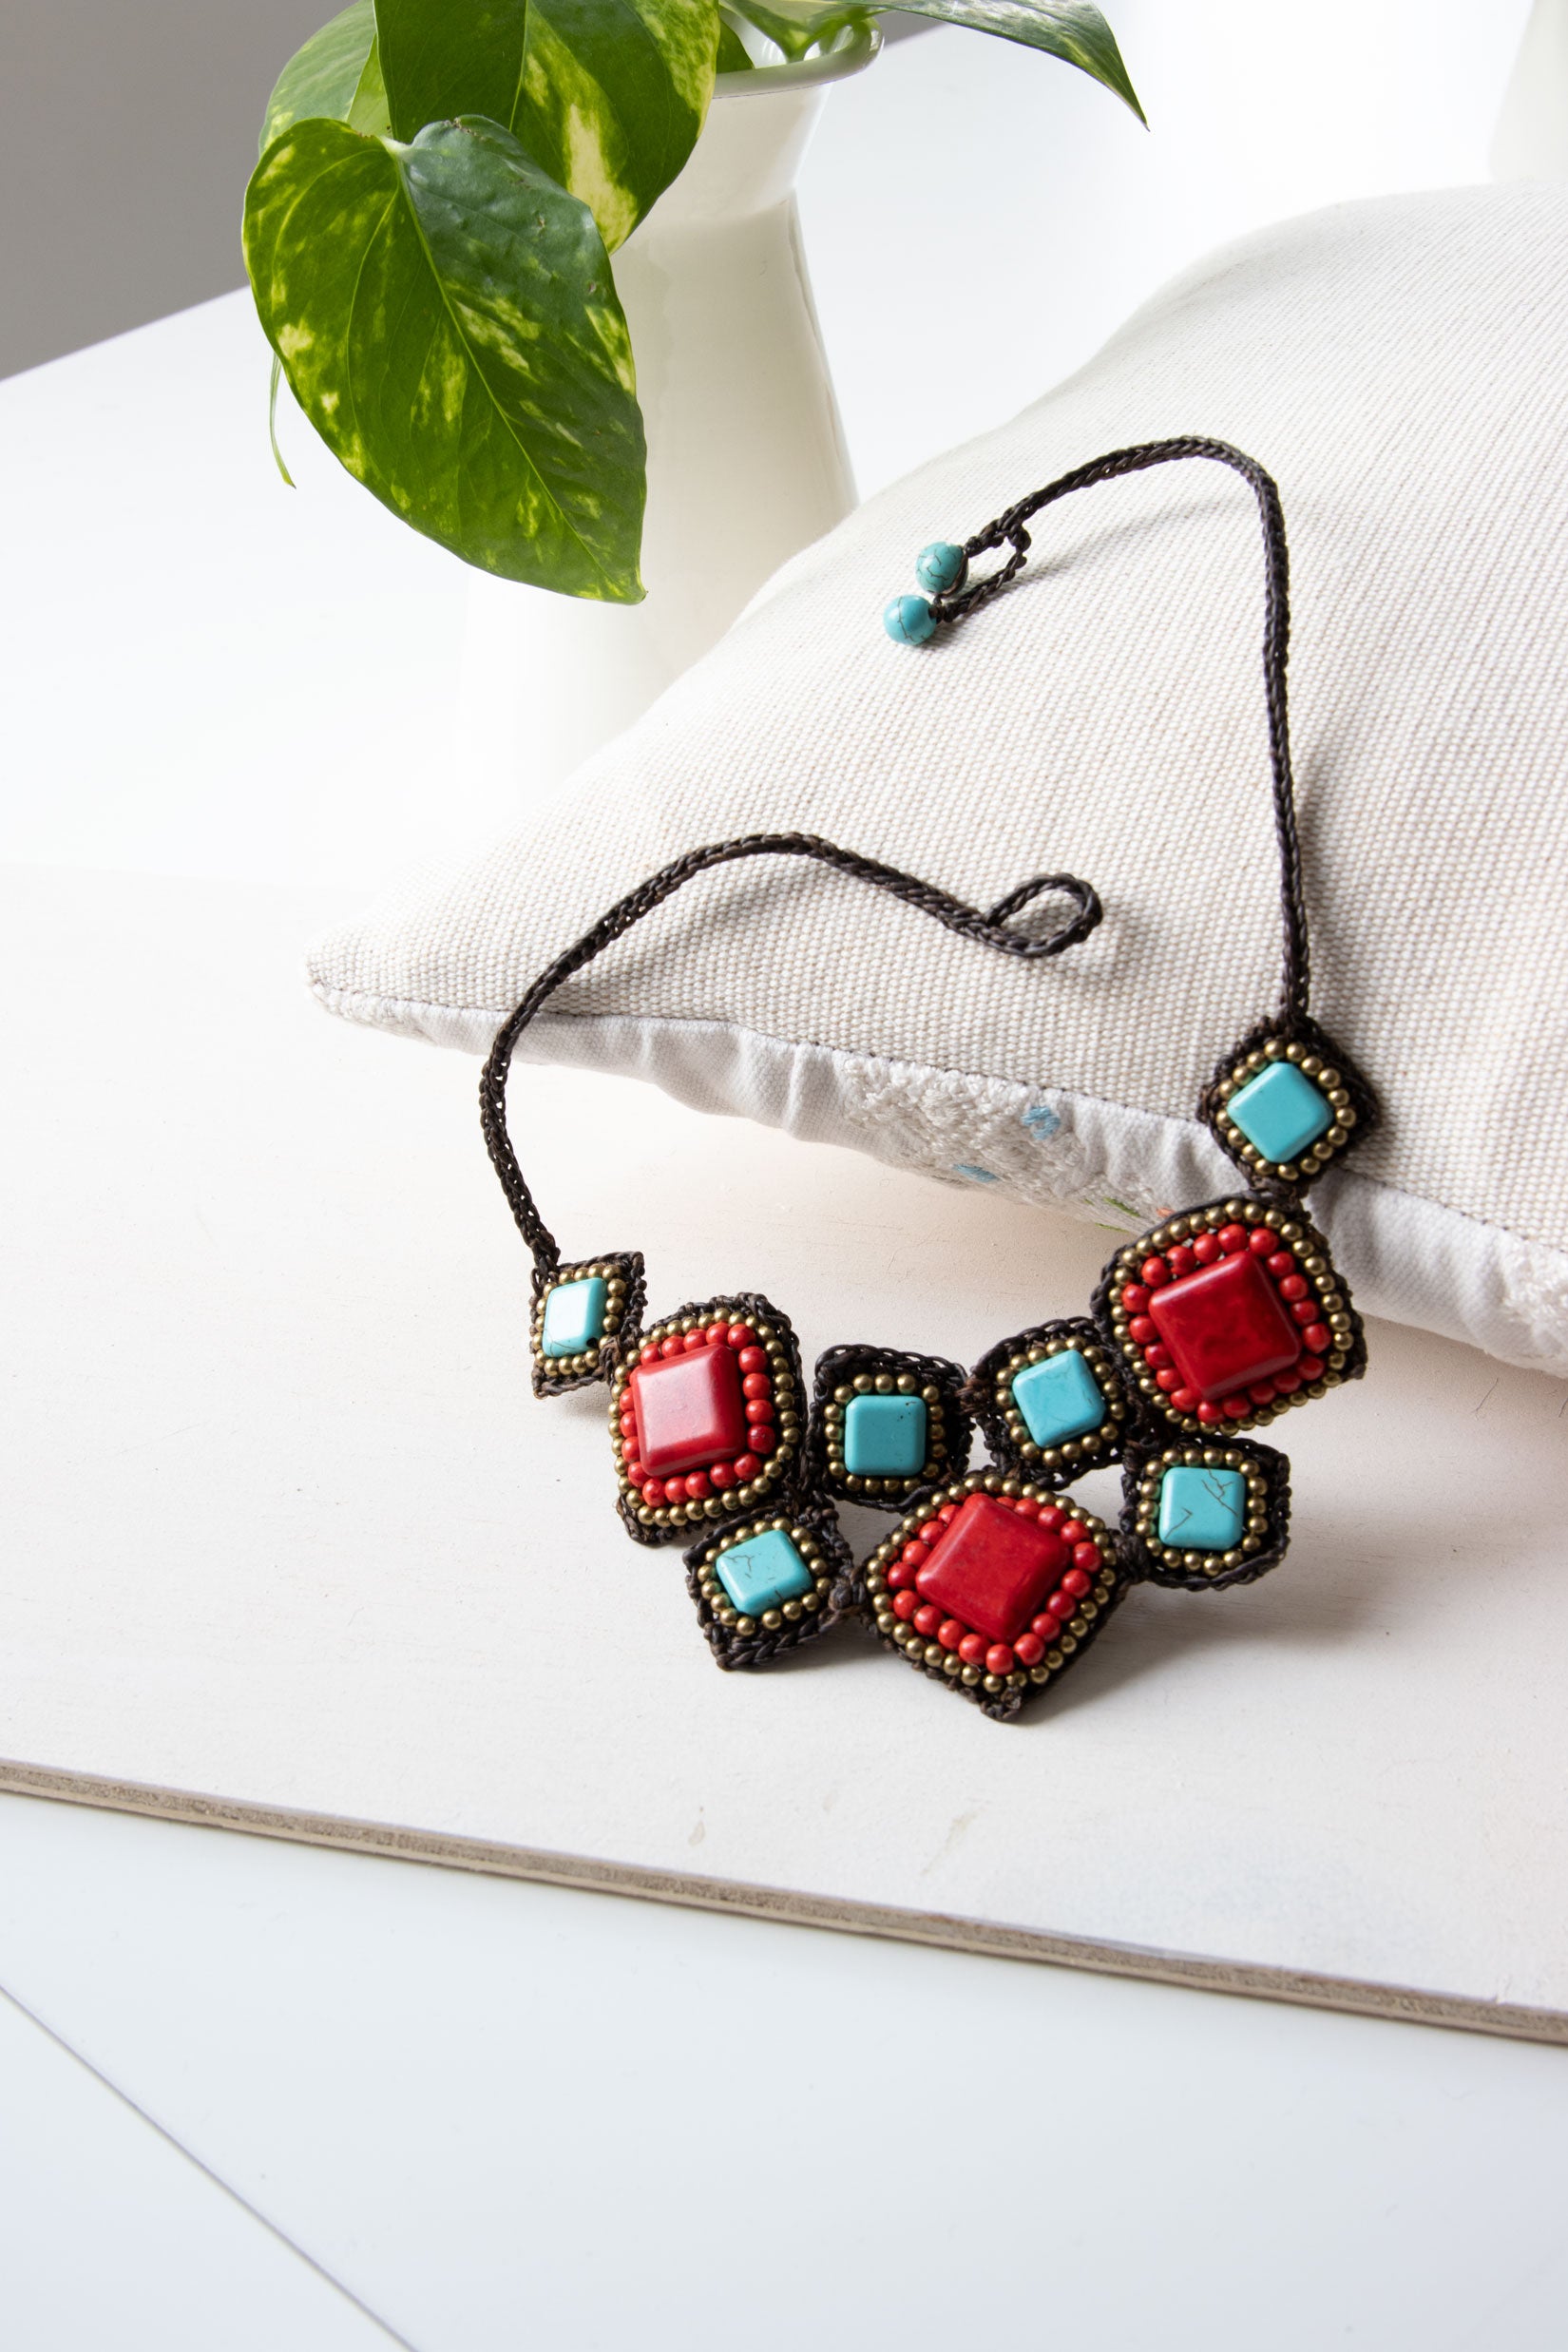 Woven Statement Necklace - 1 style